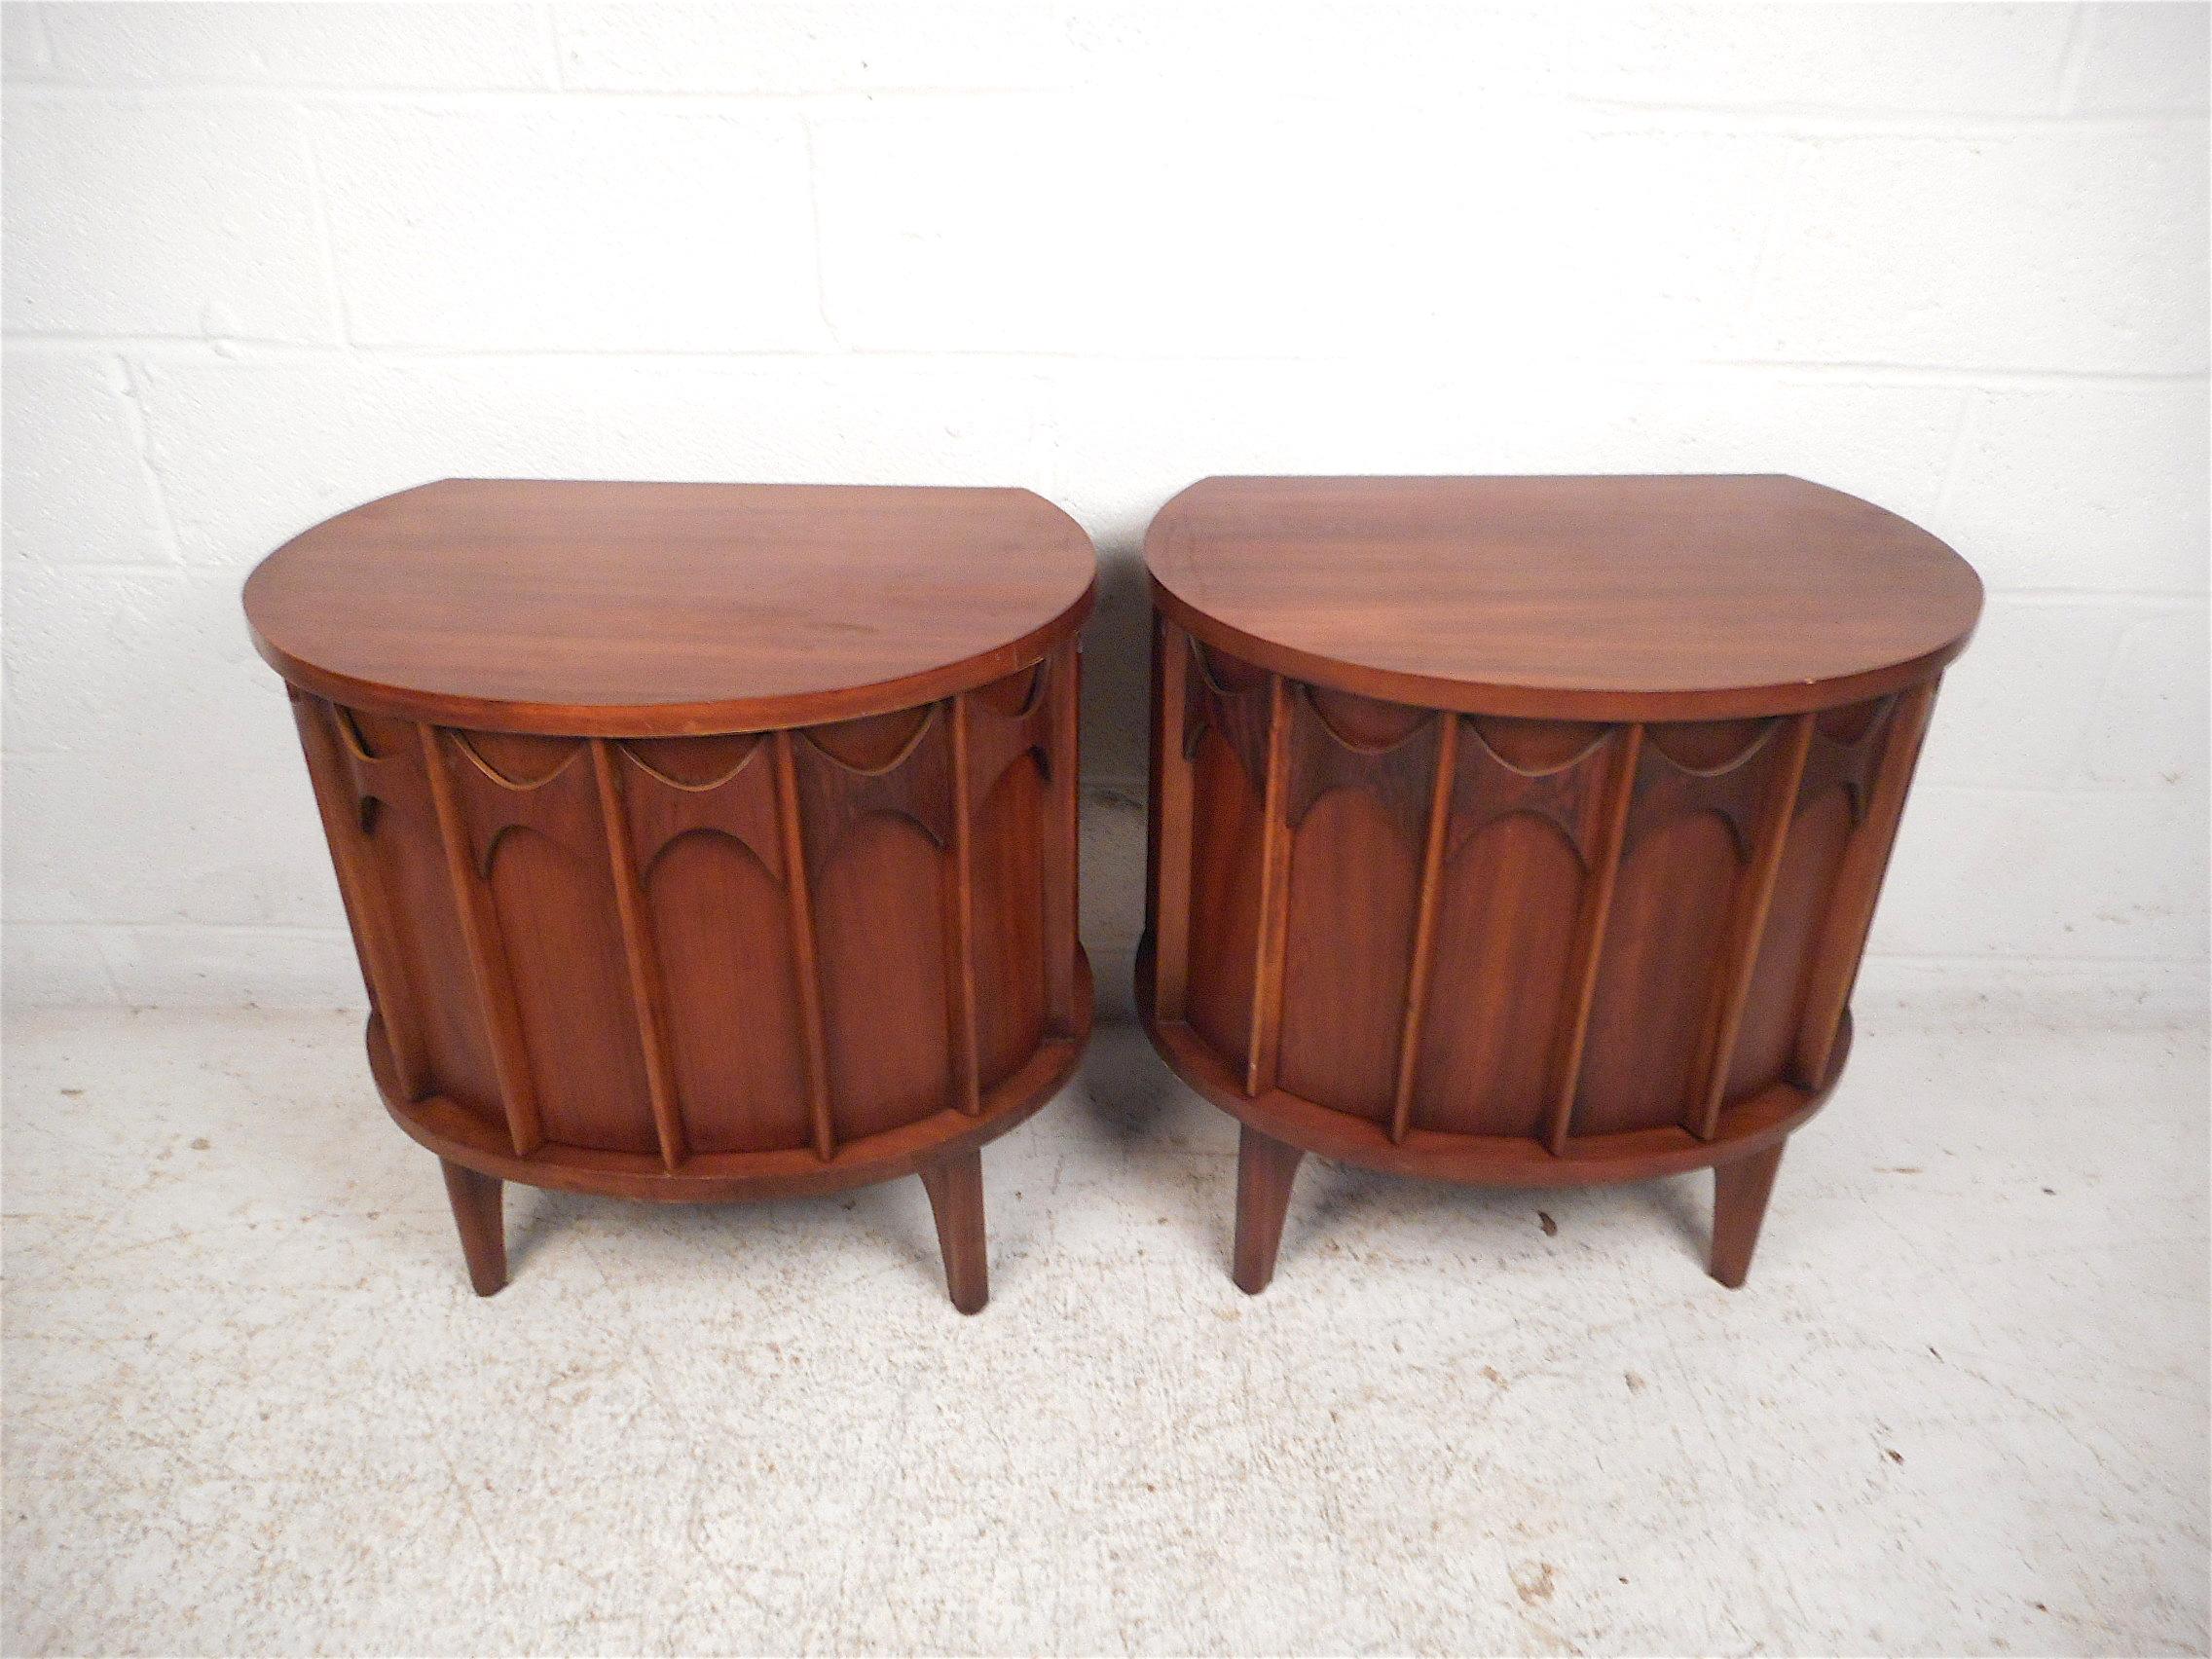 Beautiful pair of highly sought-after midcentury end tables by Kent Coffey. Sculpted wooden accents on the door-fronts which are emblematic of the 